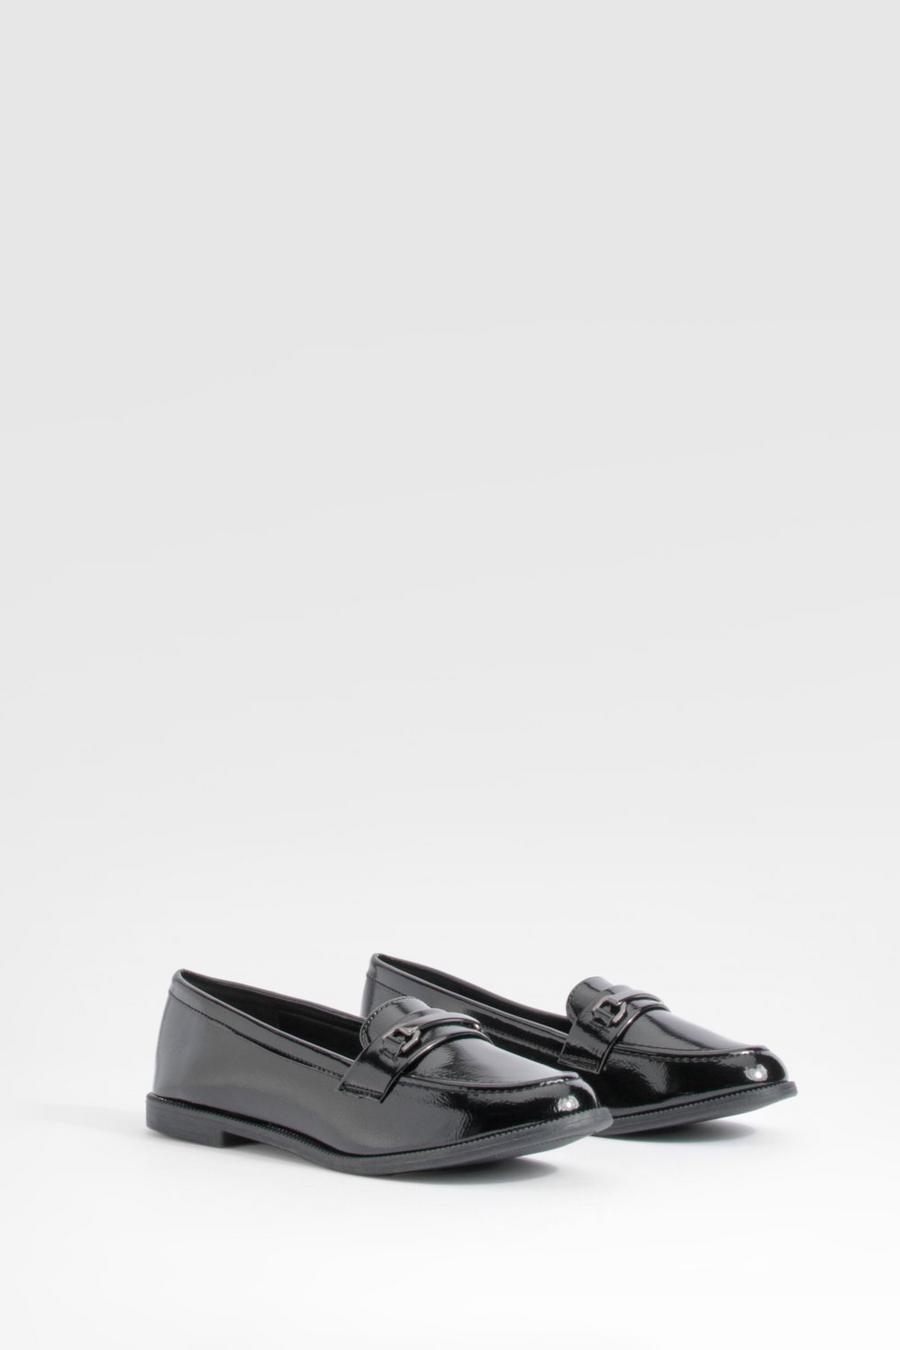 Black Patent T Bar Loafers  